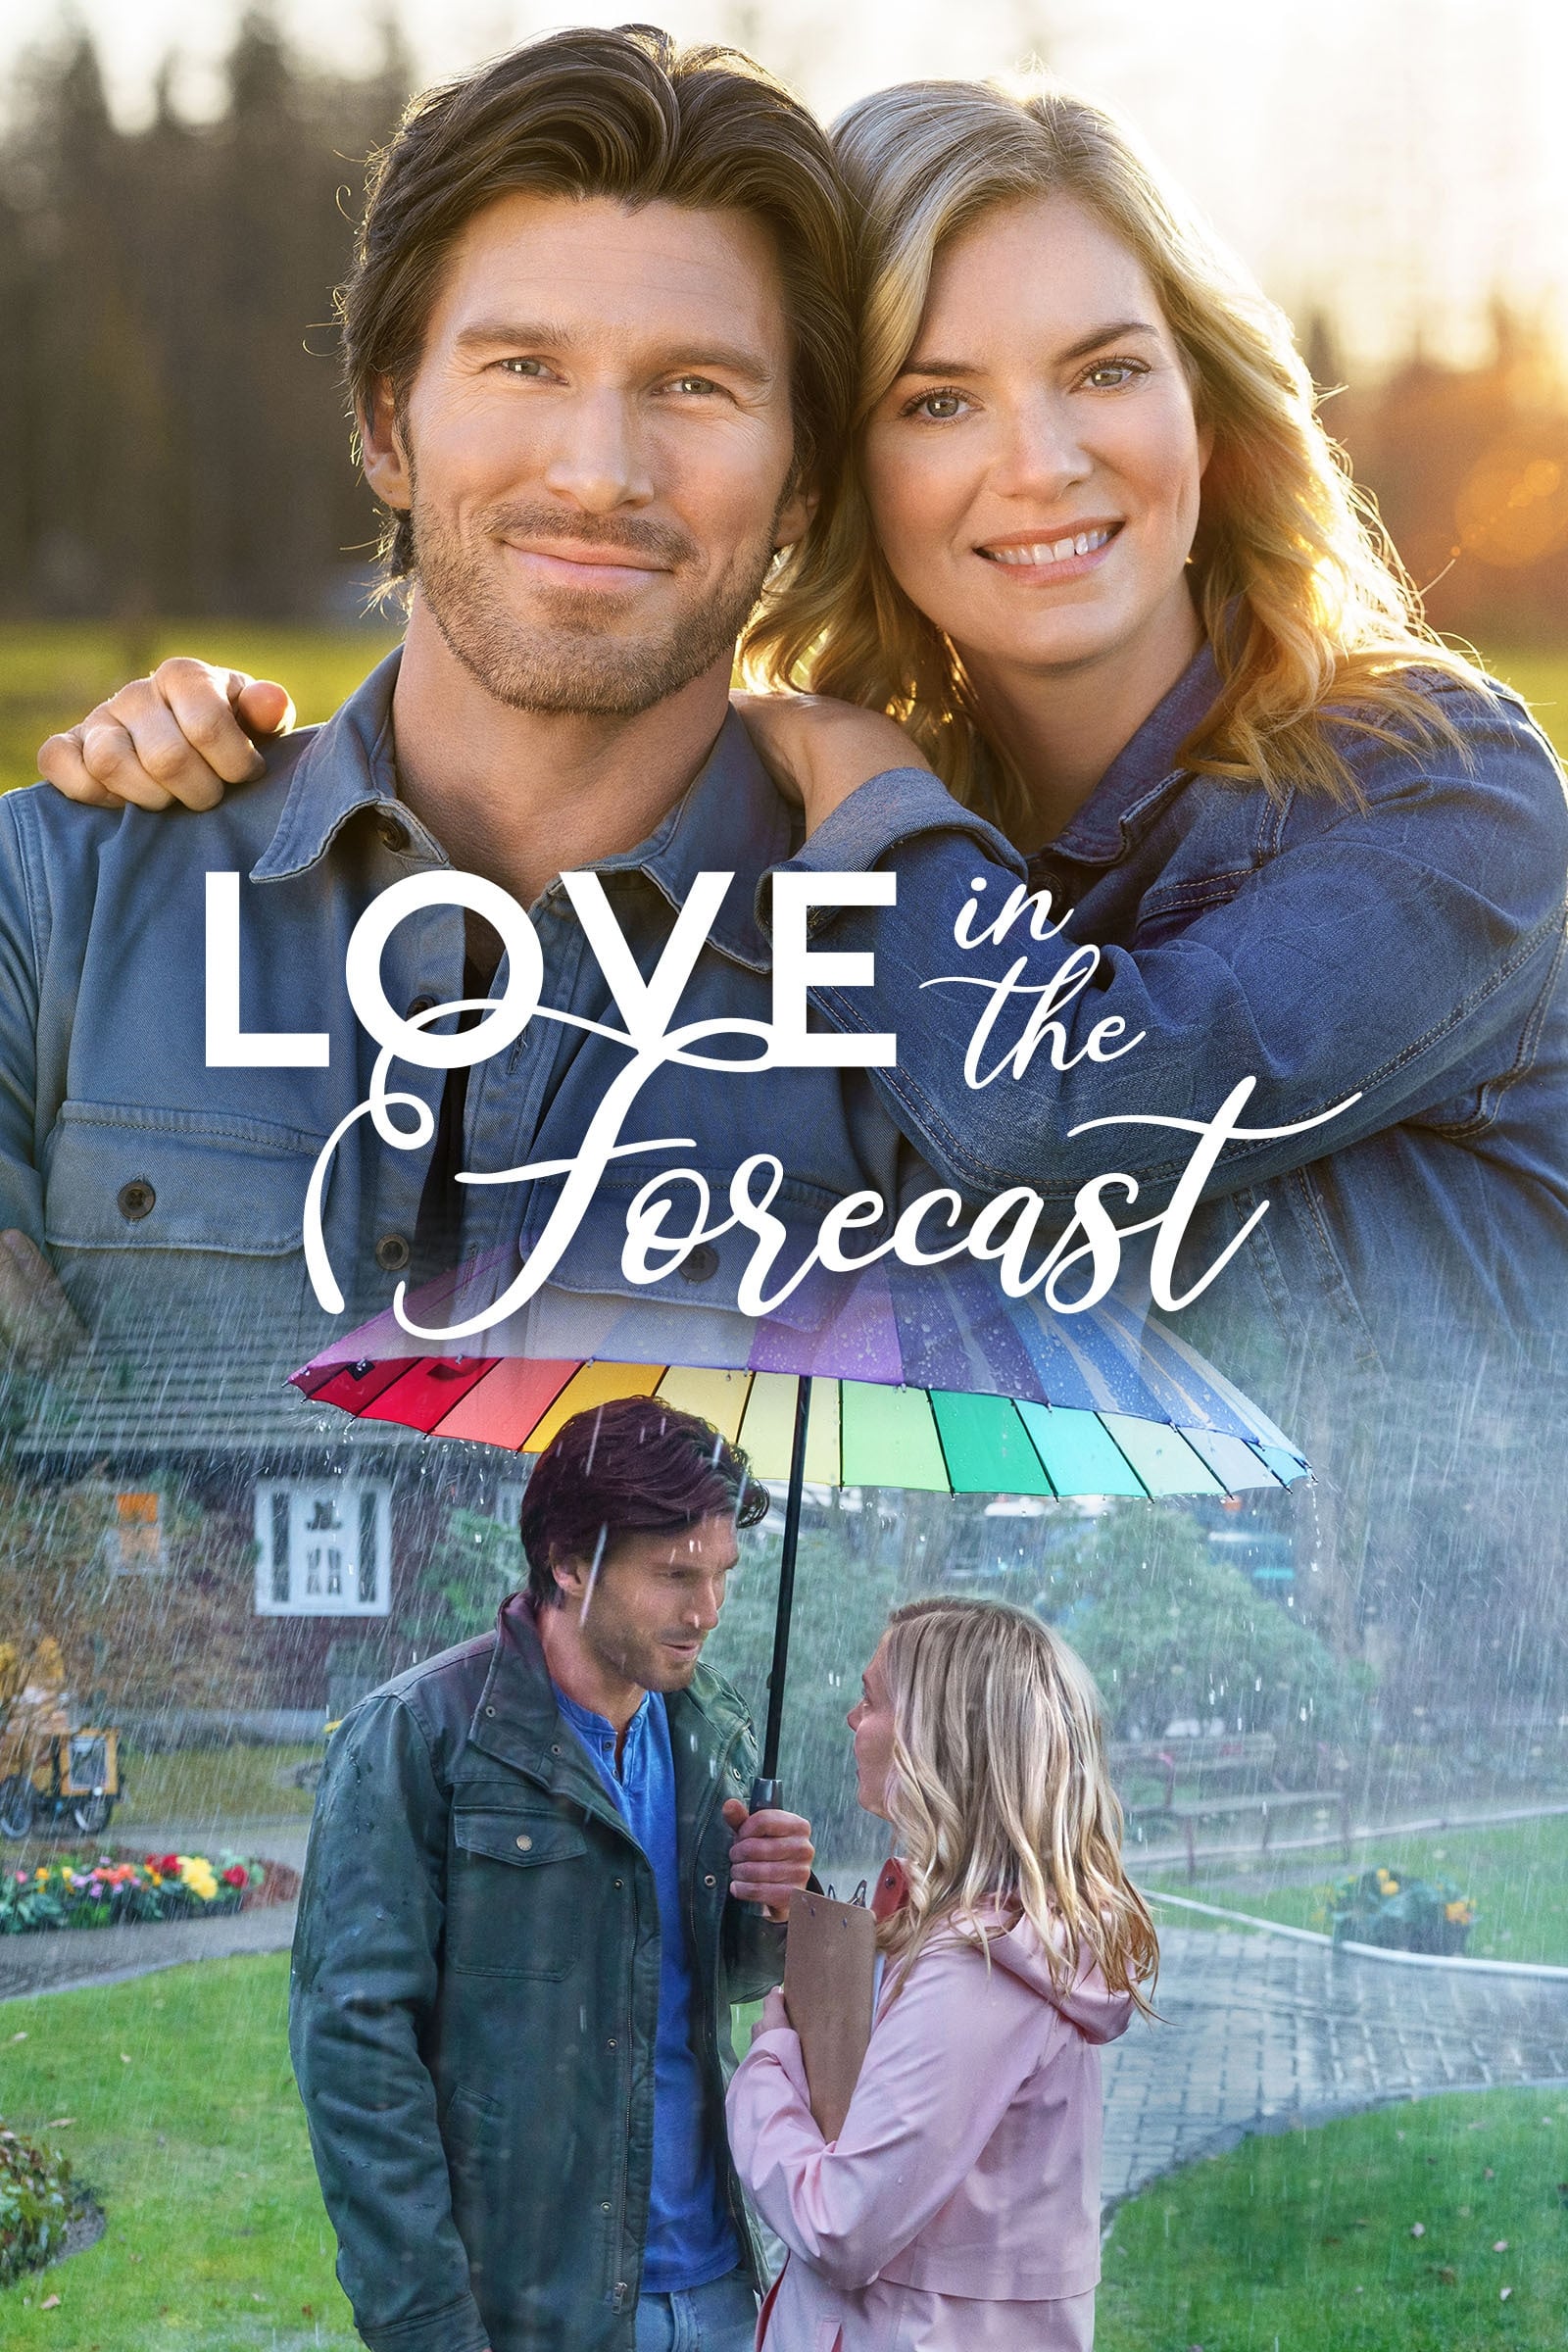 Love in the Forecast (2020) Star WEB-DL 1080p Latino